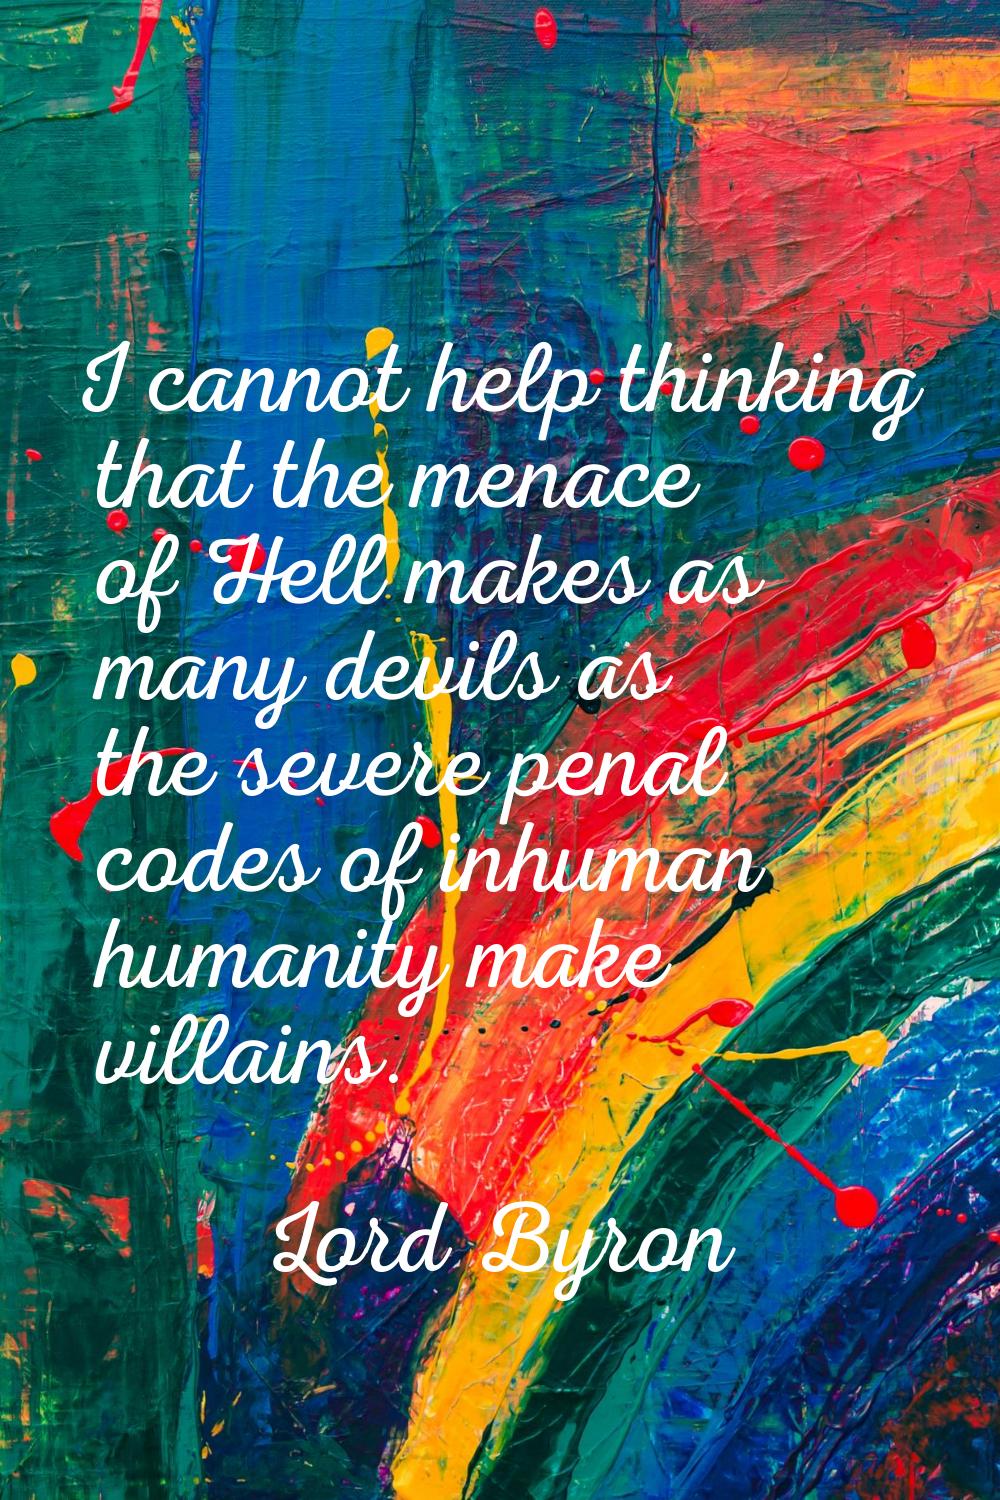 I cannot help thinking that the menace of Hell makes as many devils as the severe penal codes of in